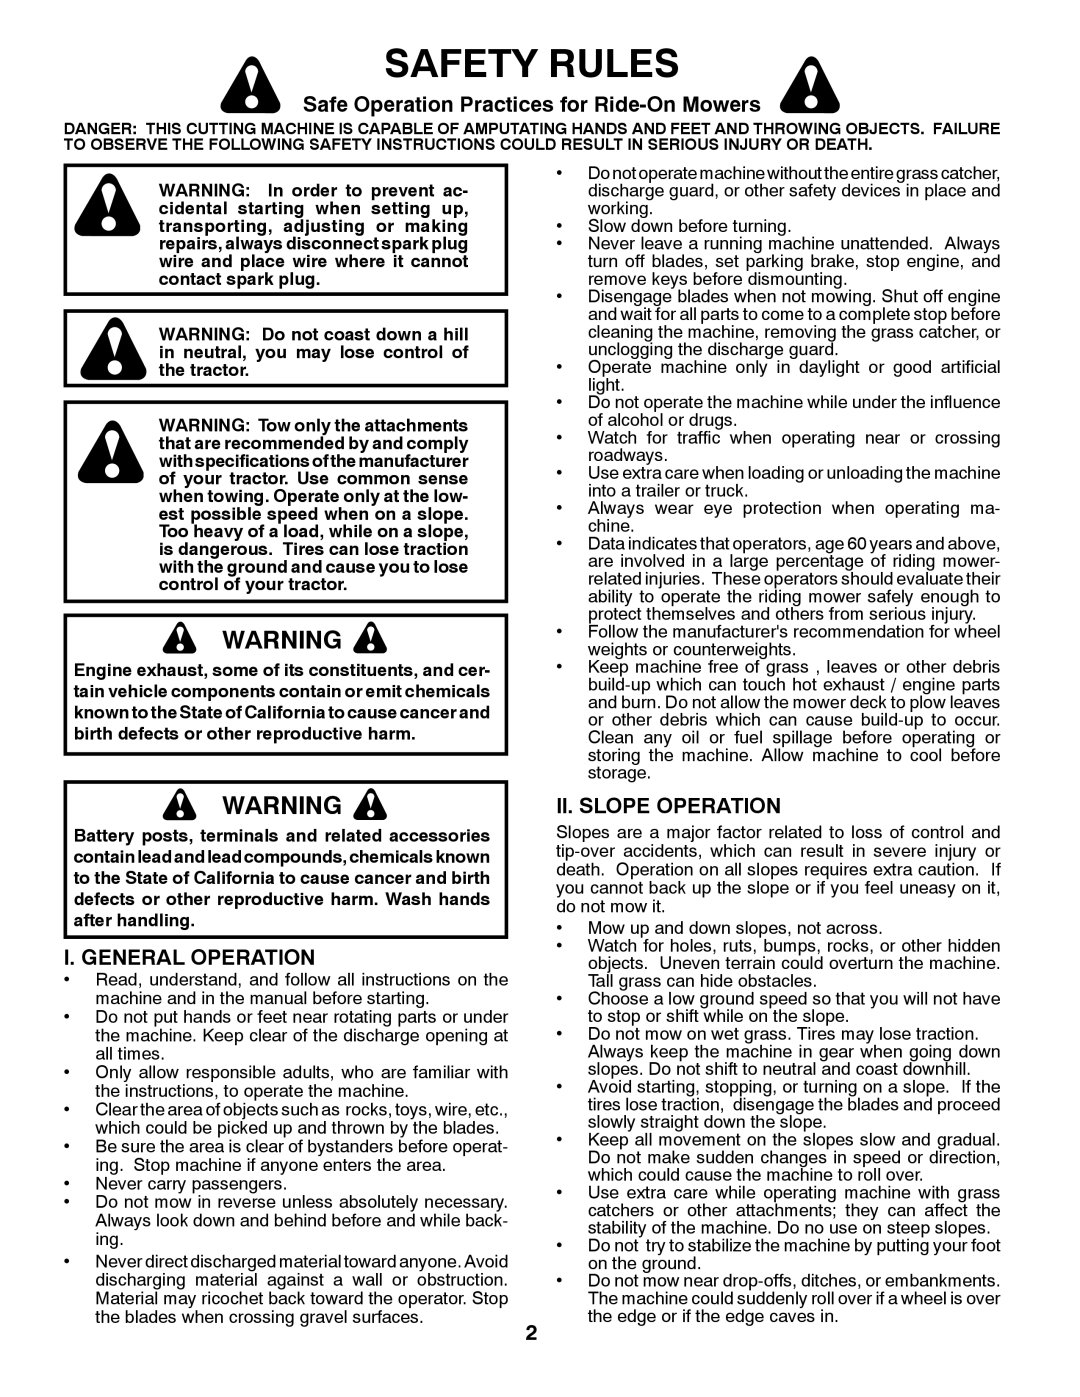 Husqvarna LGT2554 Safety Rules, Safe Operation Practices for Ride-On Mowers, I. General Operation, Ii. Slope Operation 